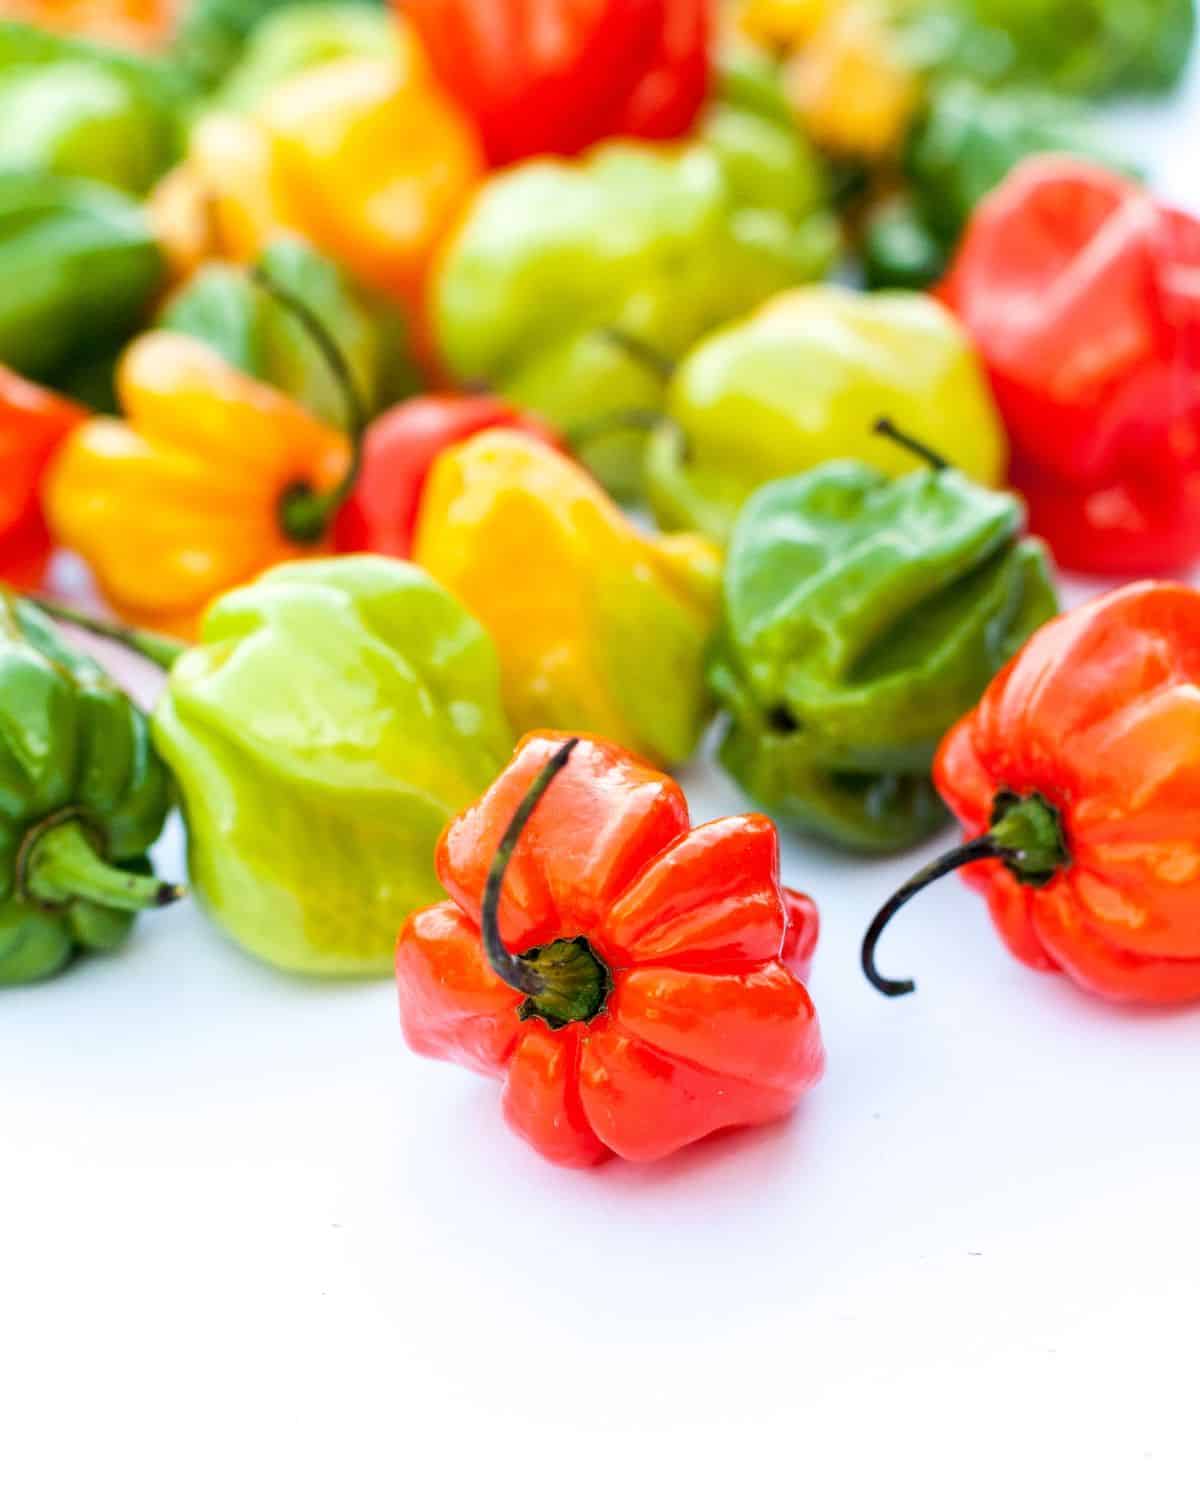 scotch bonnet peppers in various colors